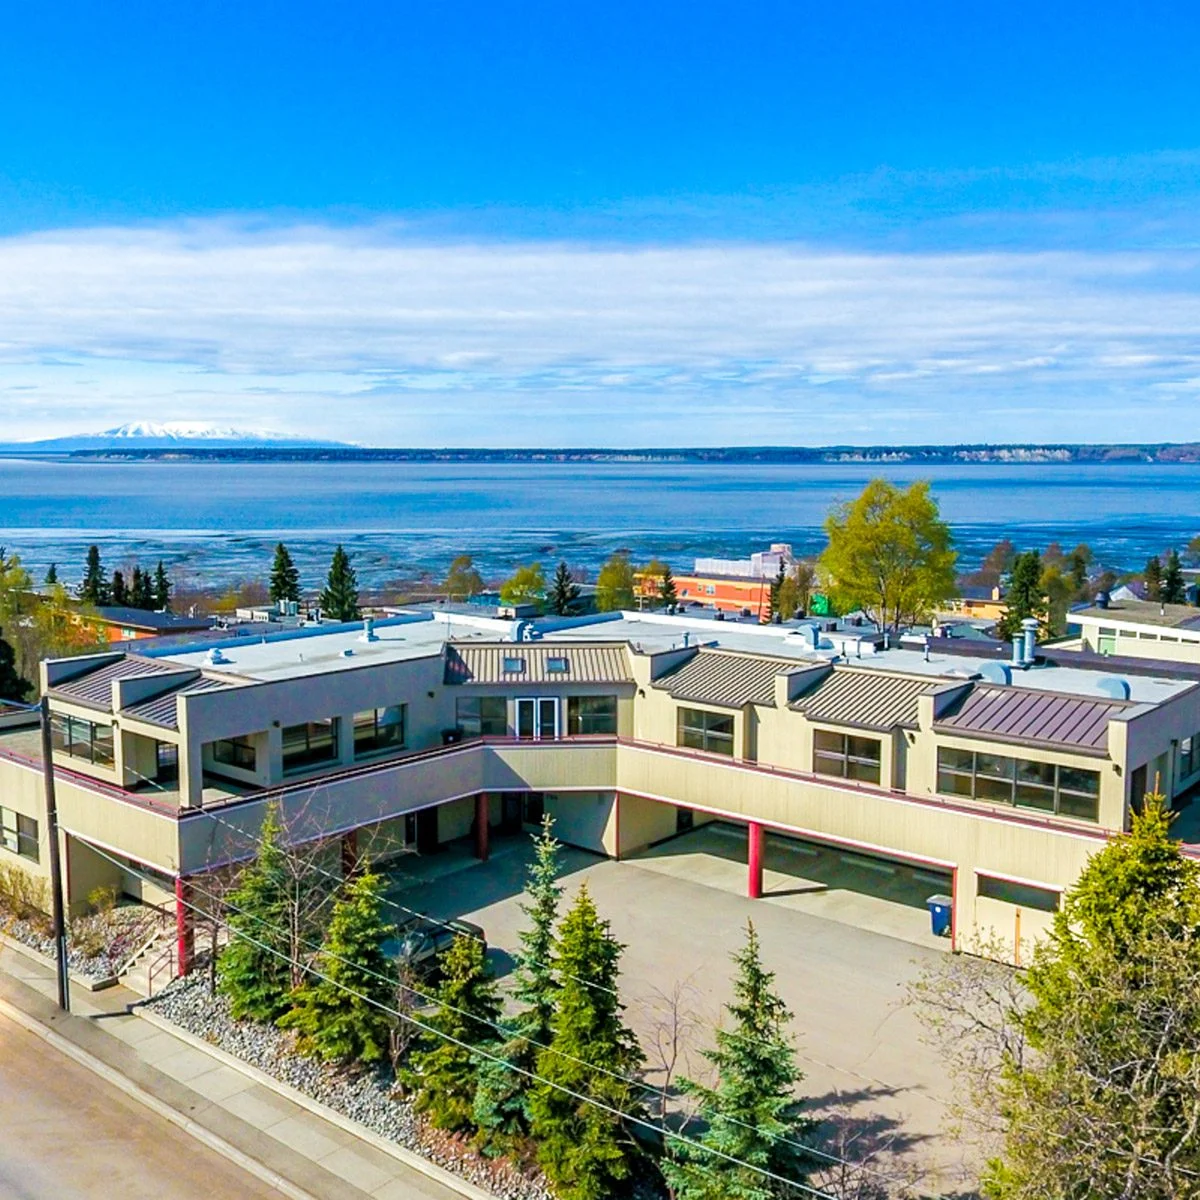 Exterior of RSD Properties' commercial office space at 731 N Street on a sunny Anchorage, Alaska day. Tan two-story L-shaped building with trees lining the parking area in the front and a view of Cook Inlet in the background.